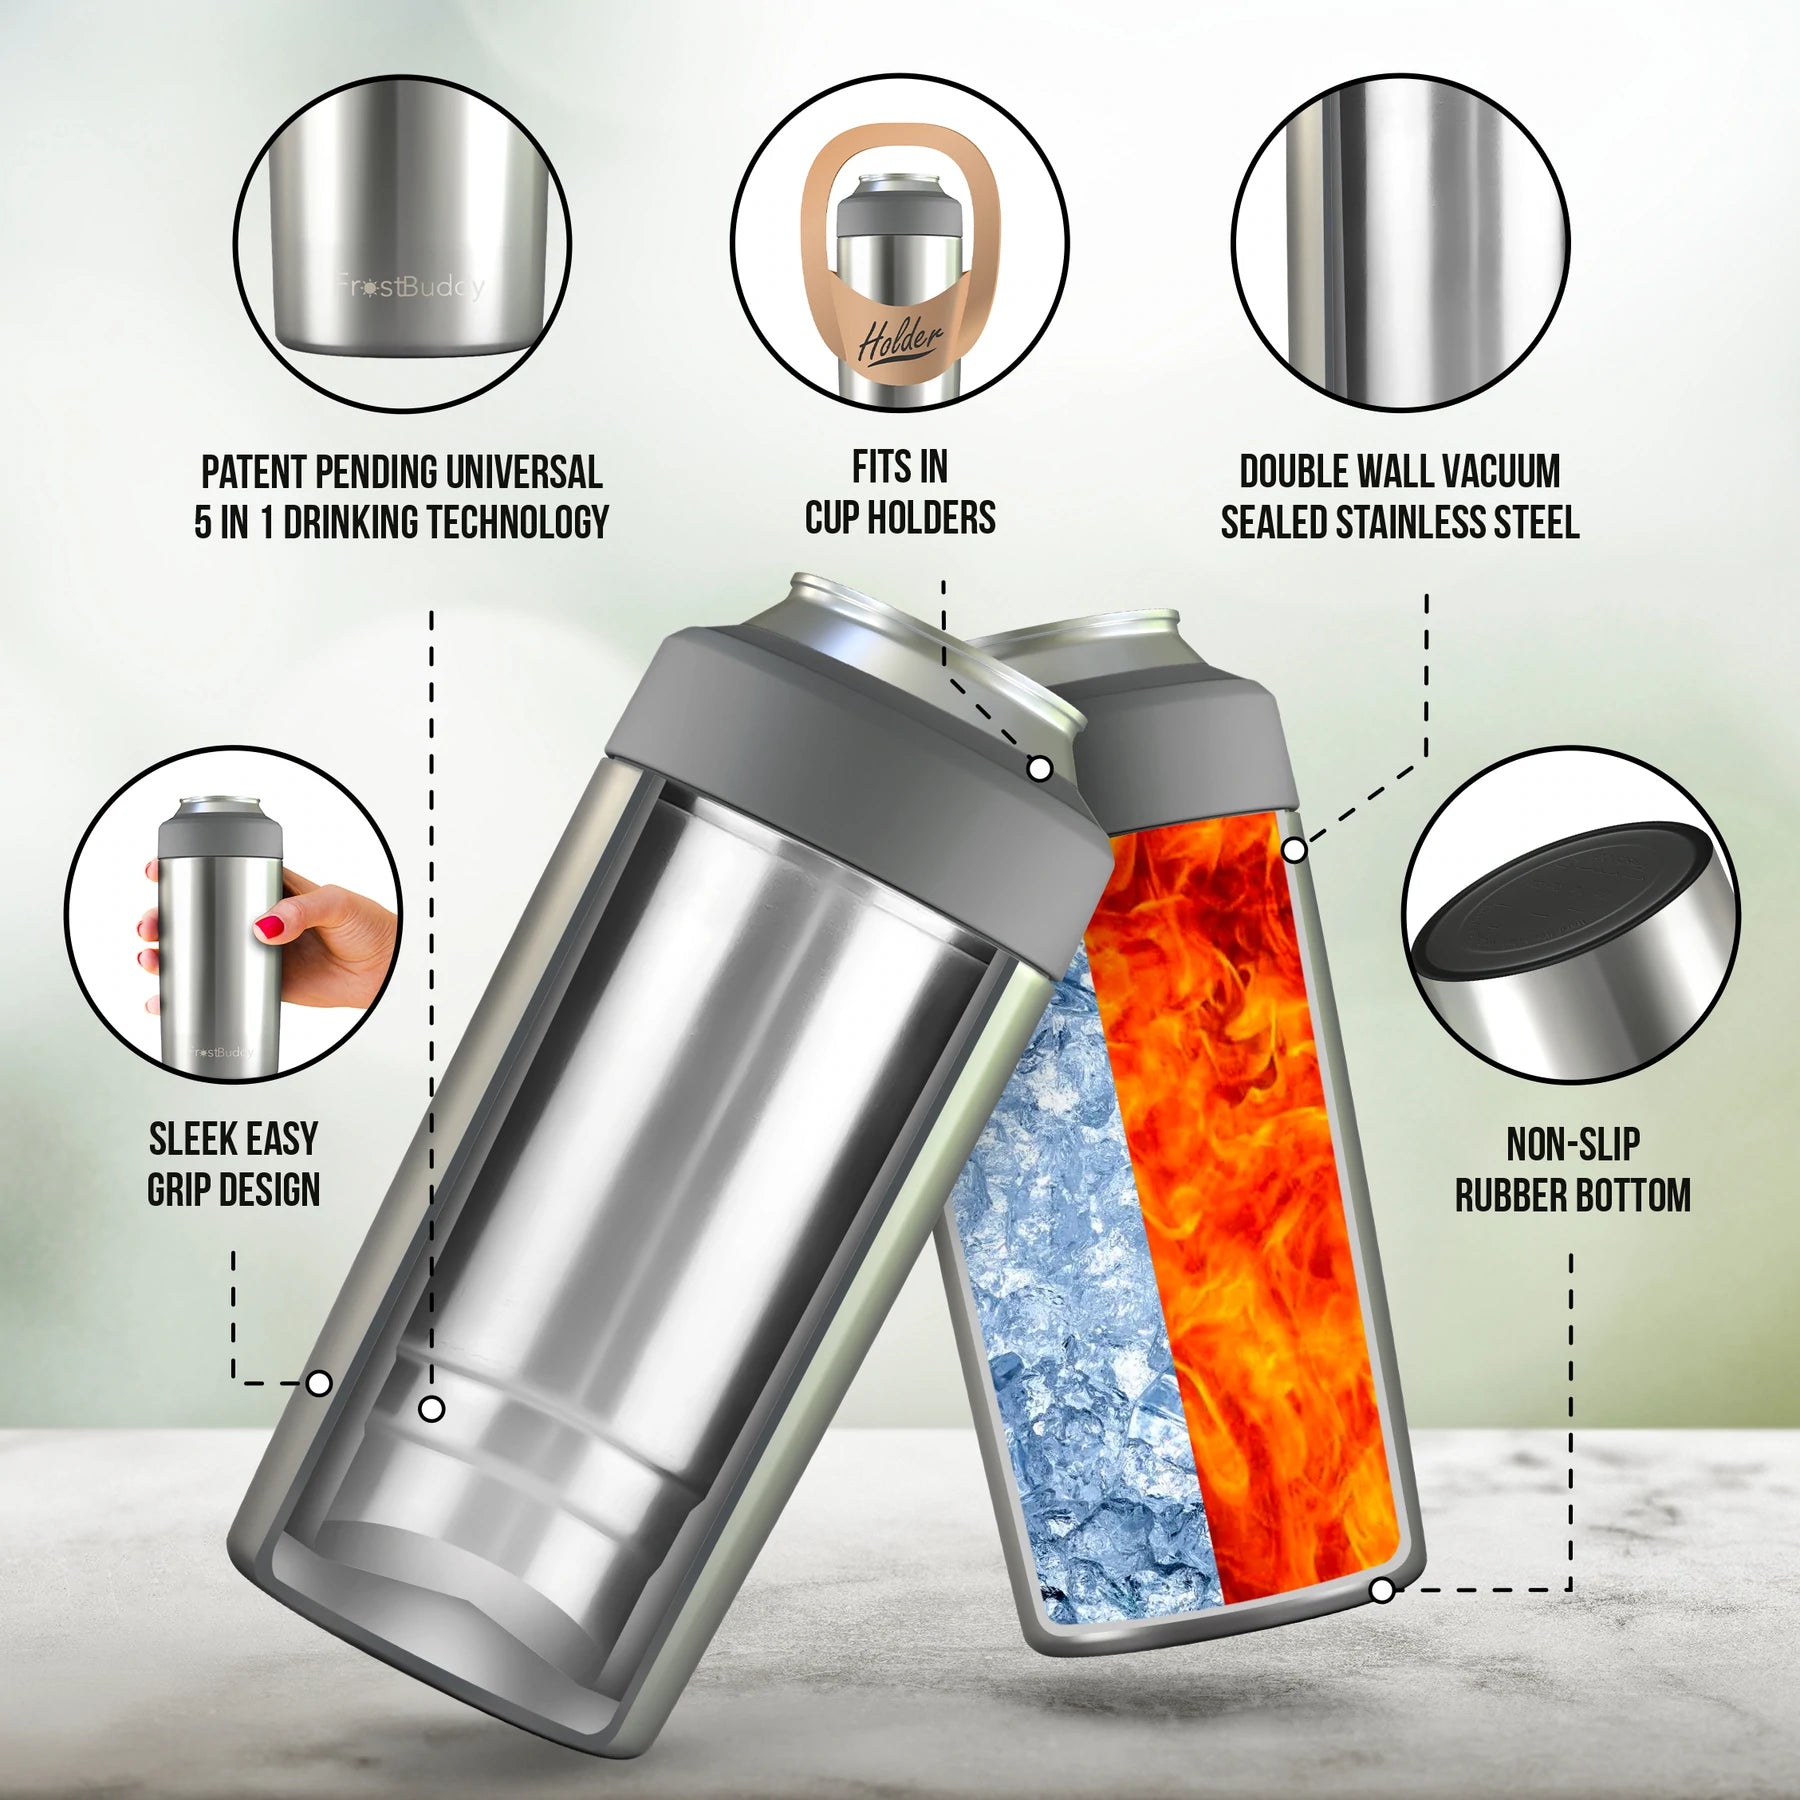 Frost Buddy​ Universal 2.0 Insulated Hibiscus Floral Can Cooler